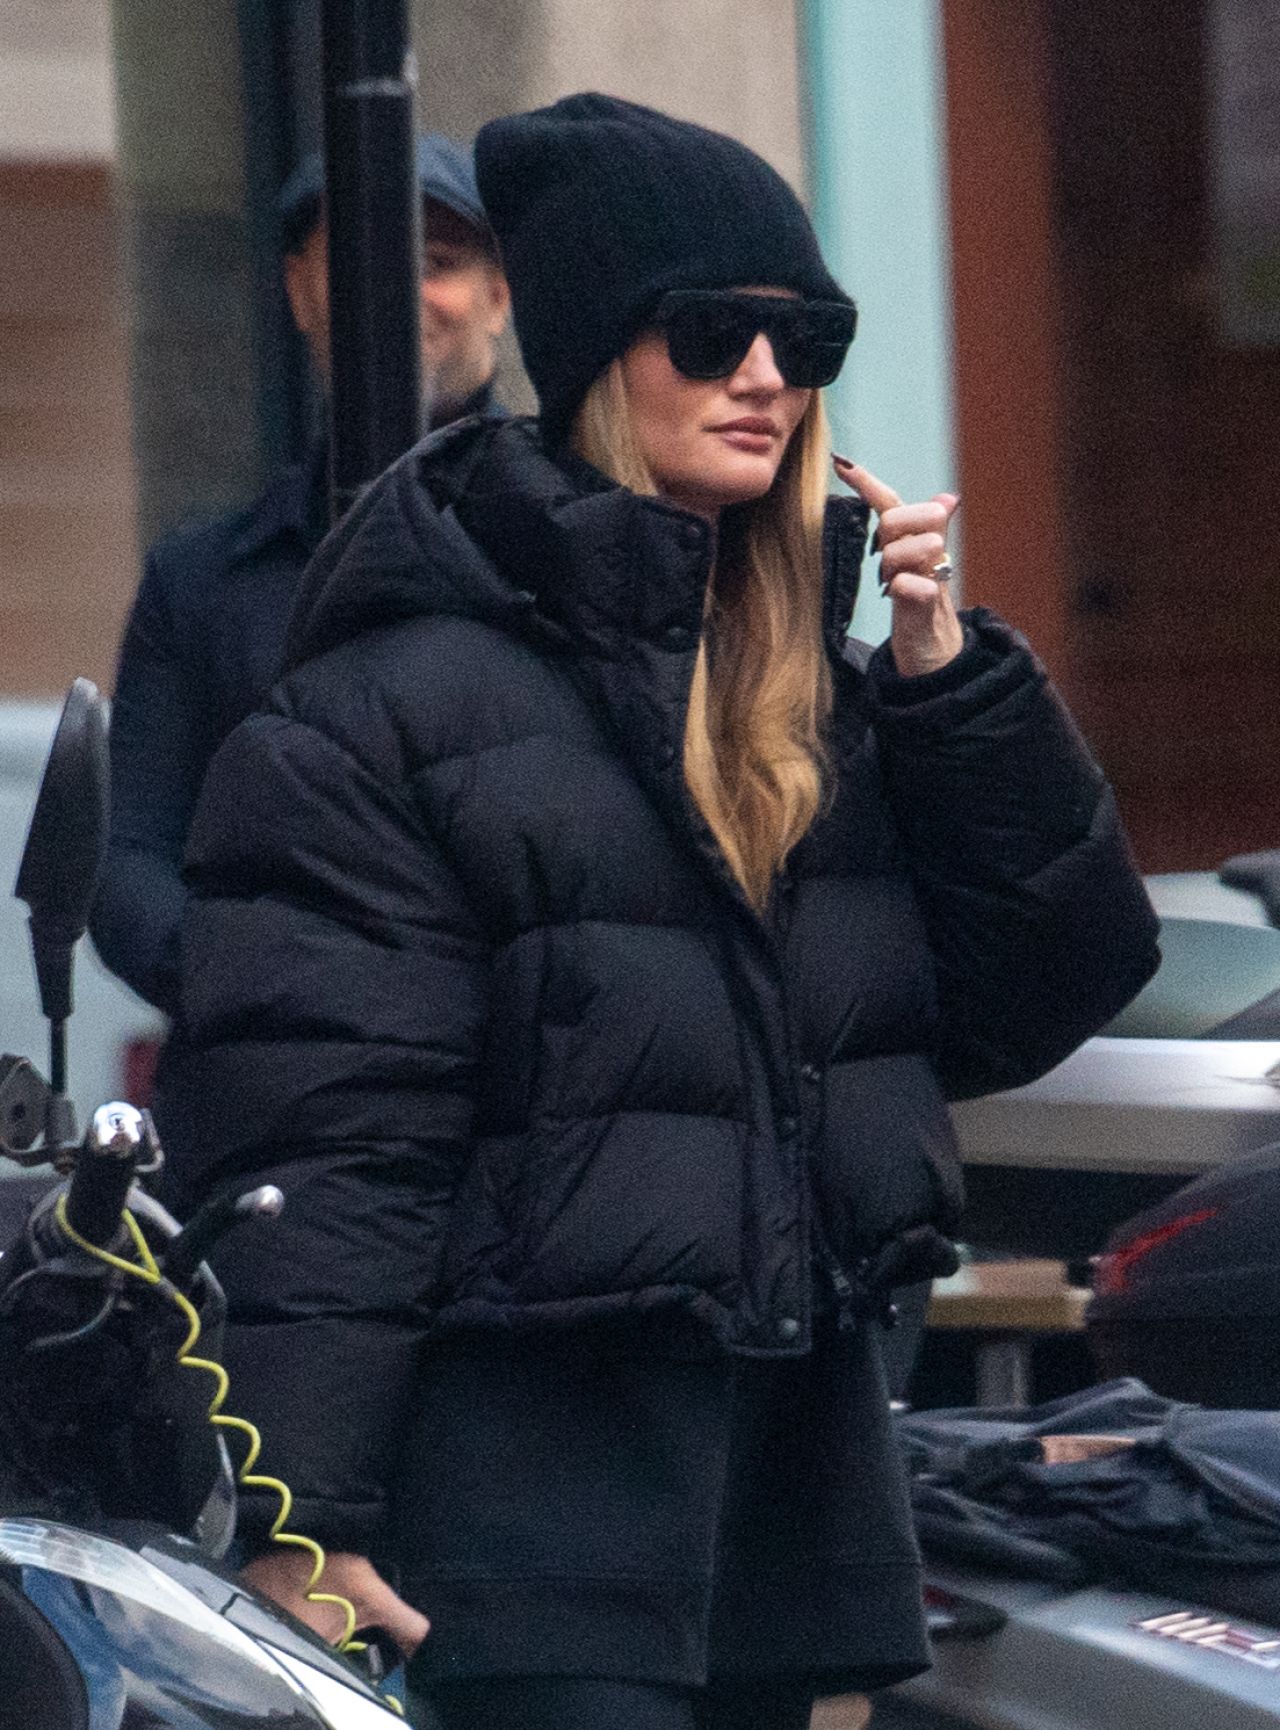 Rosie Huntington Whiteley leaves a workout in Chelsea carrying an